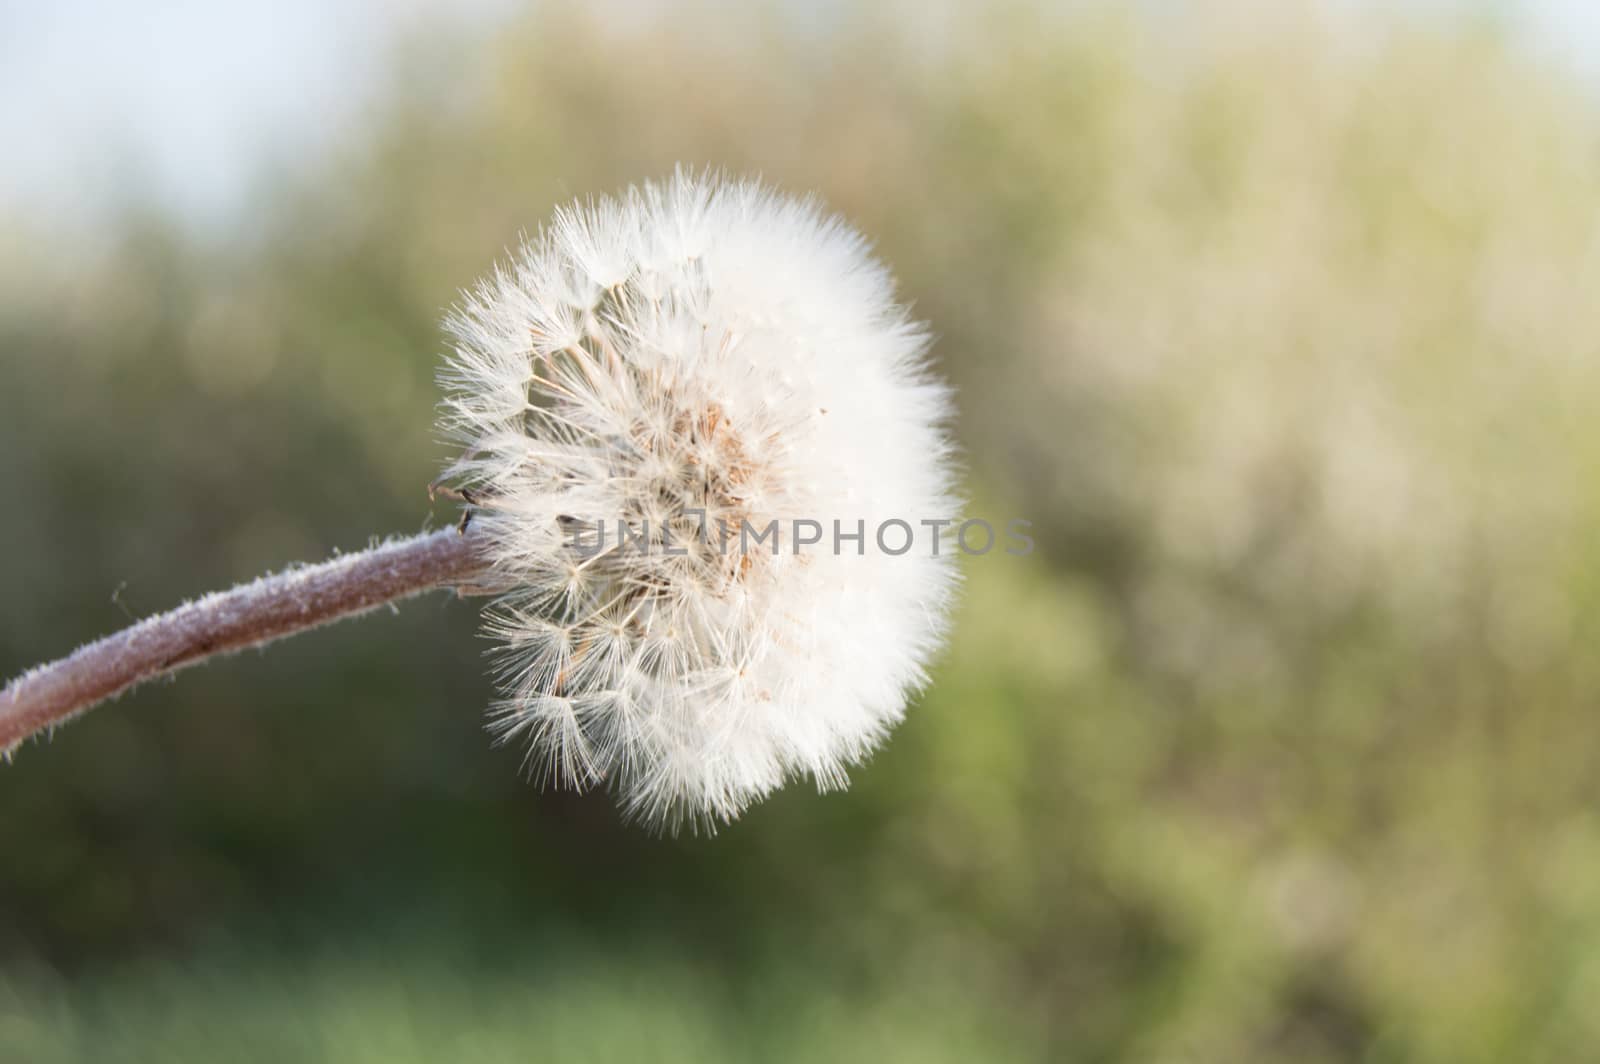 White fluffy dandelion, natural green blurred background image, selective focus by claire_lucia